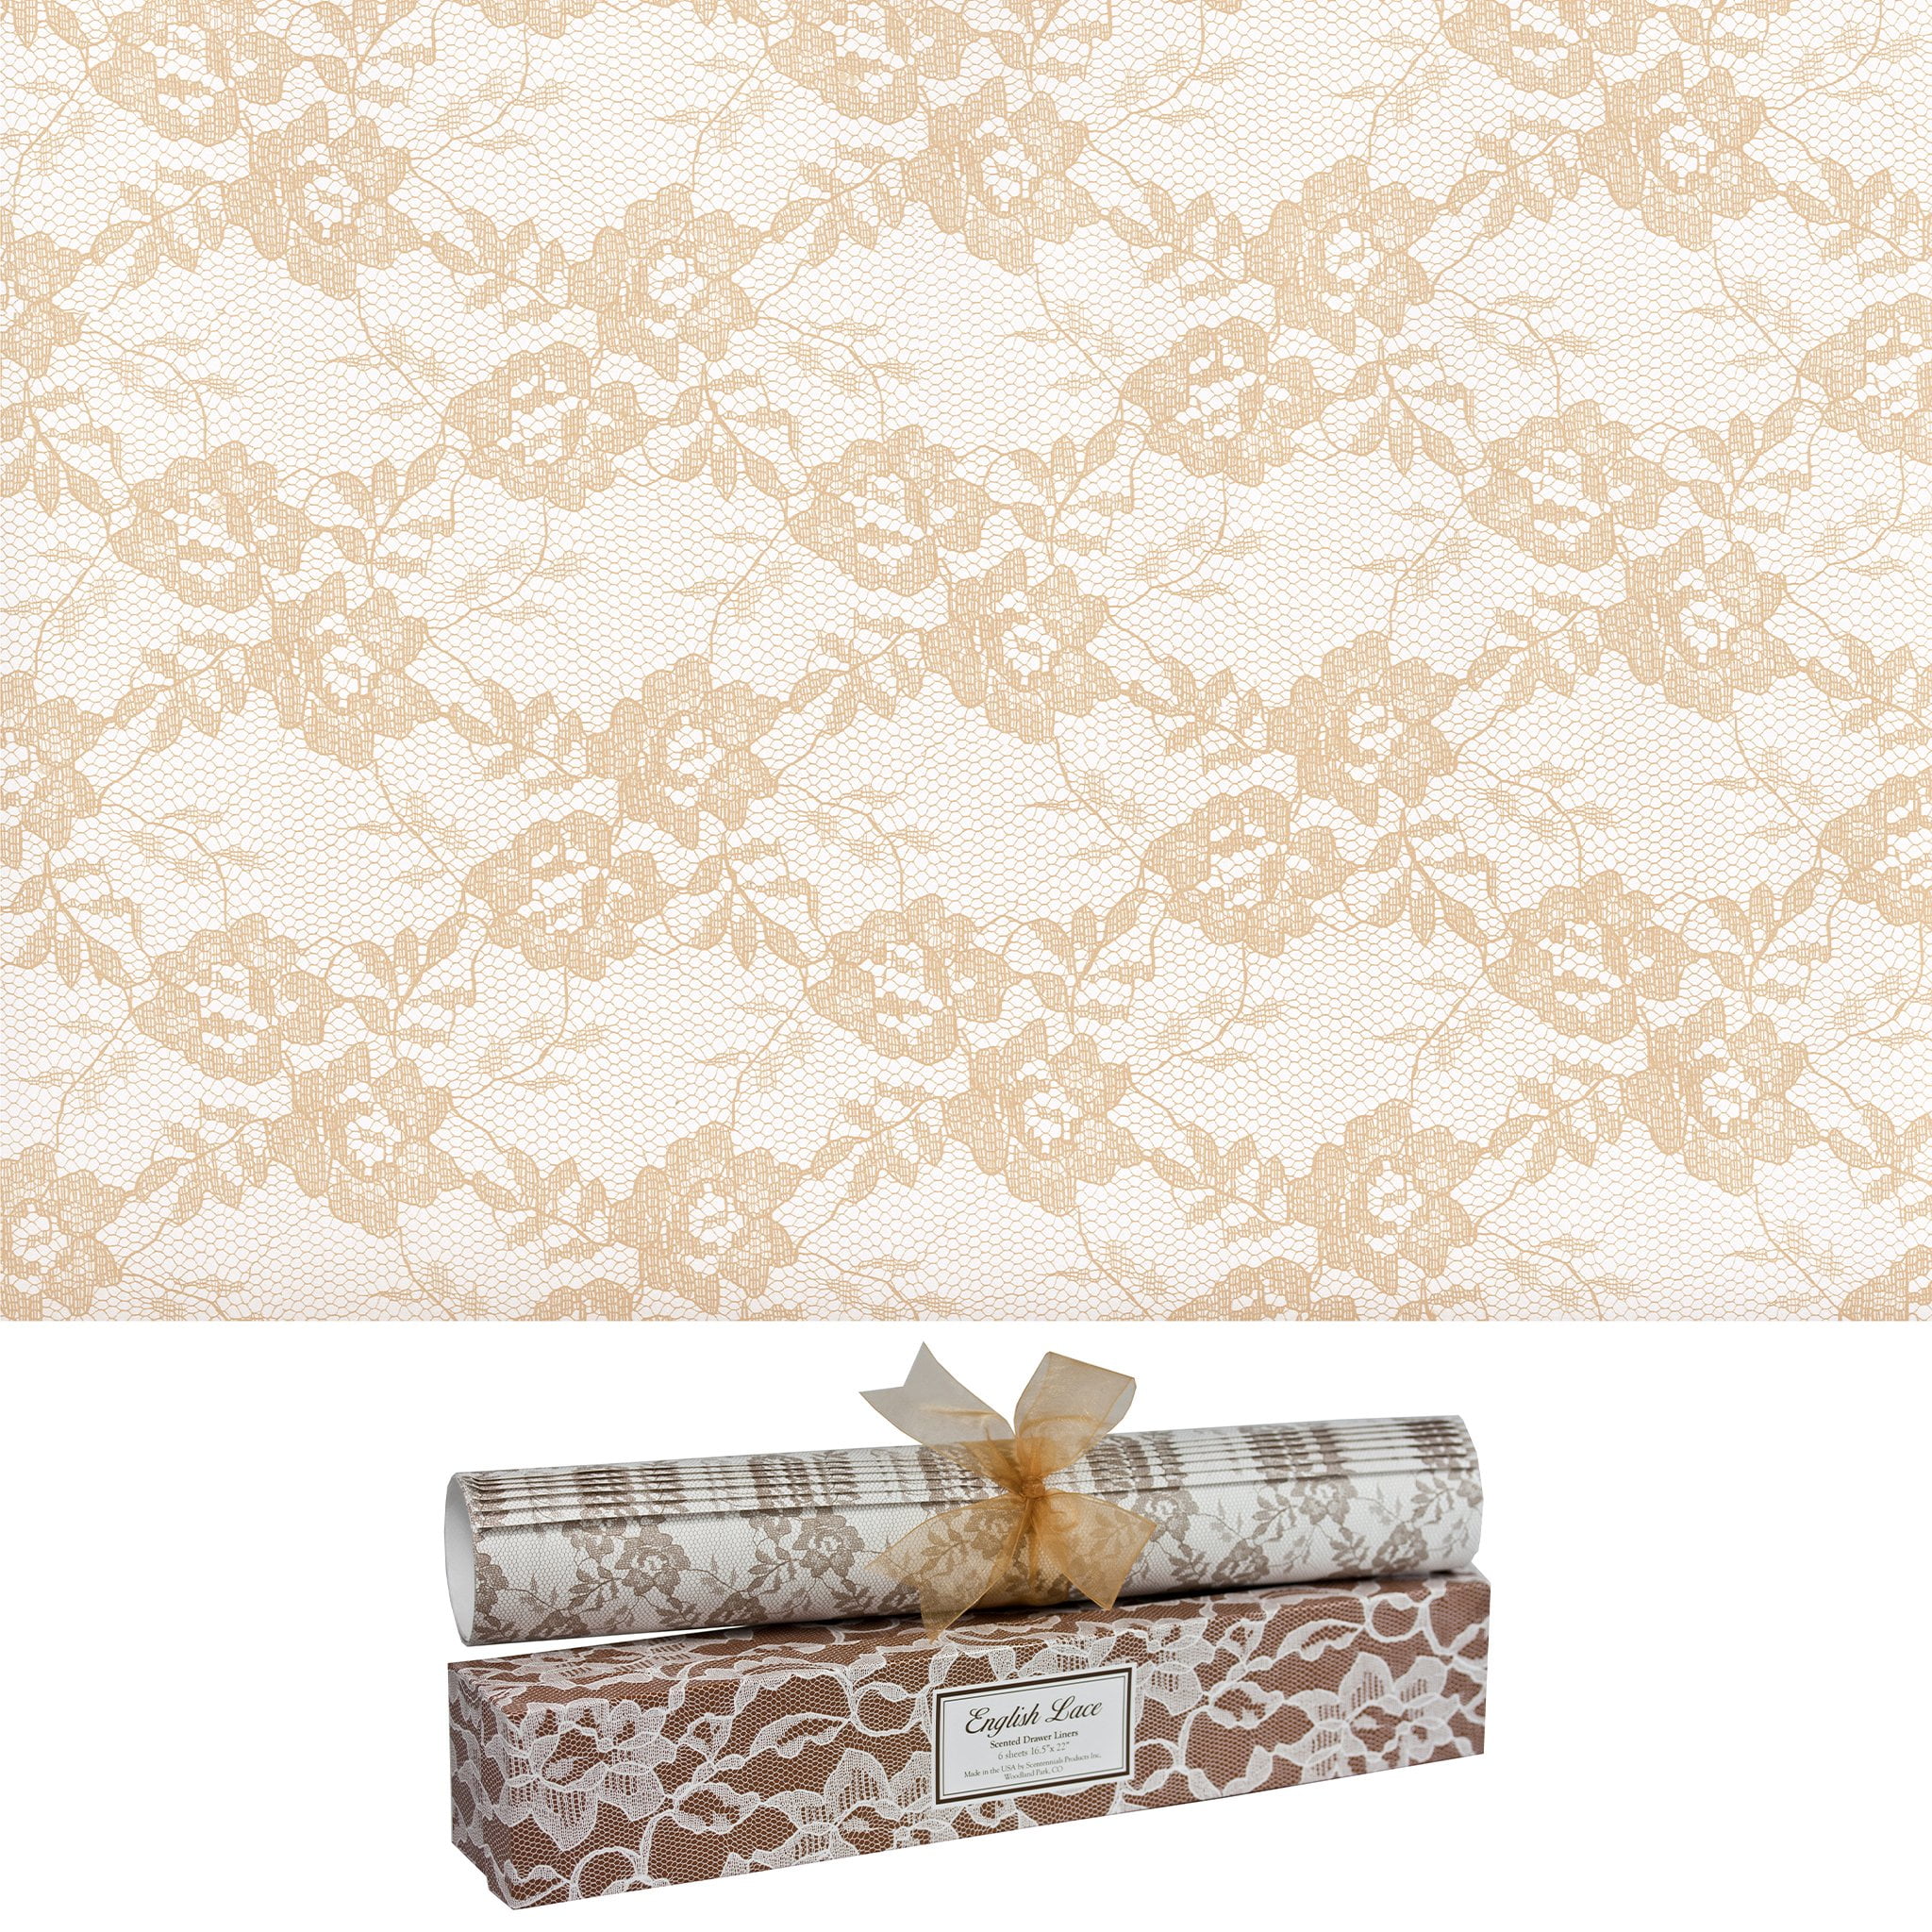 Scentennials English Lace Scented Drawer Liner from